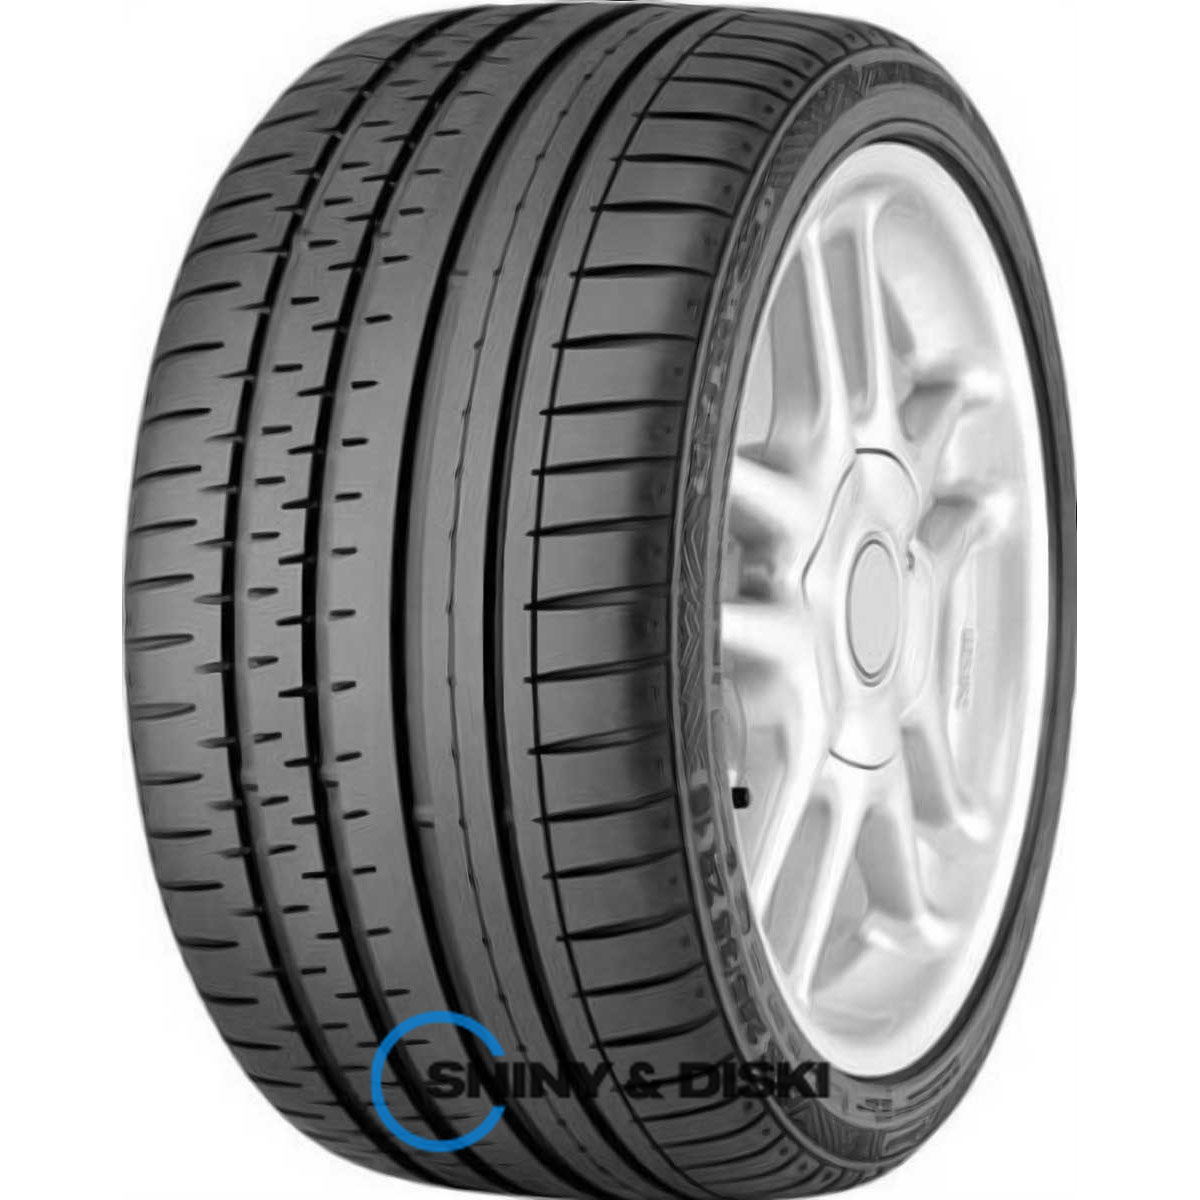 continental sportcontact 2 275/40 r19 105y mo